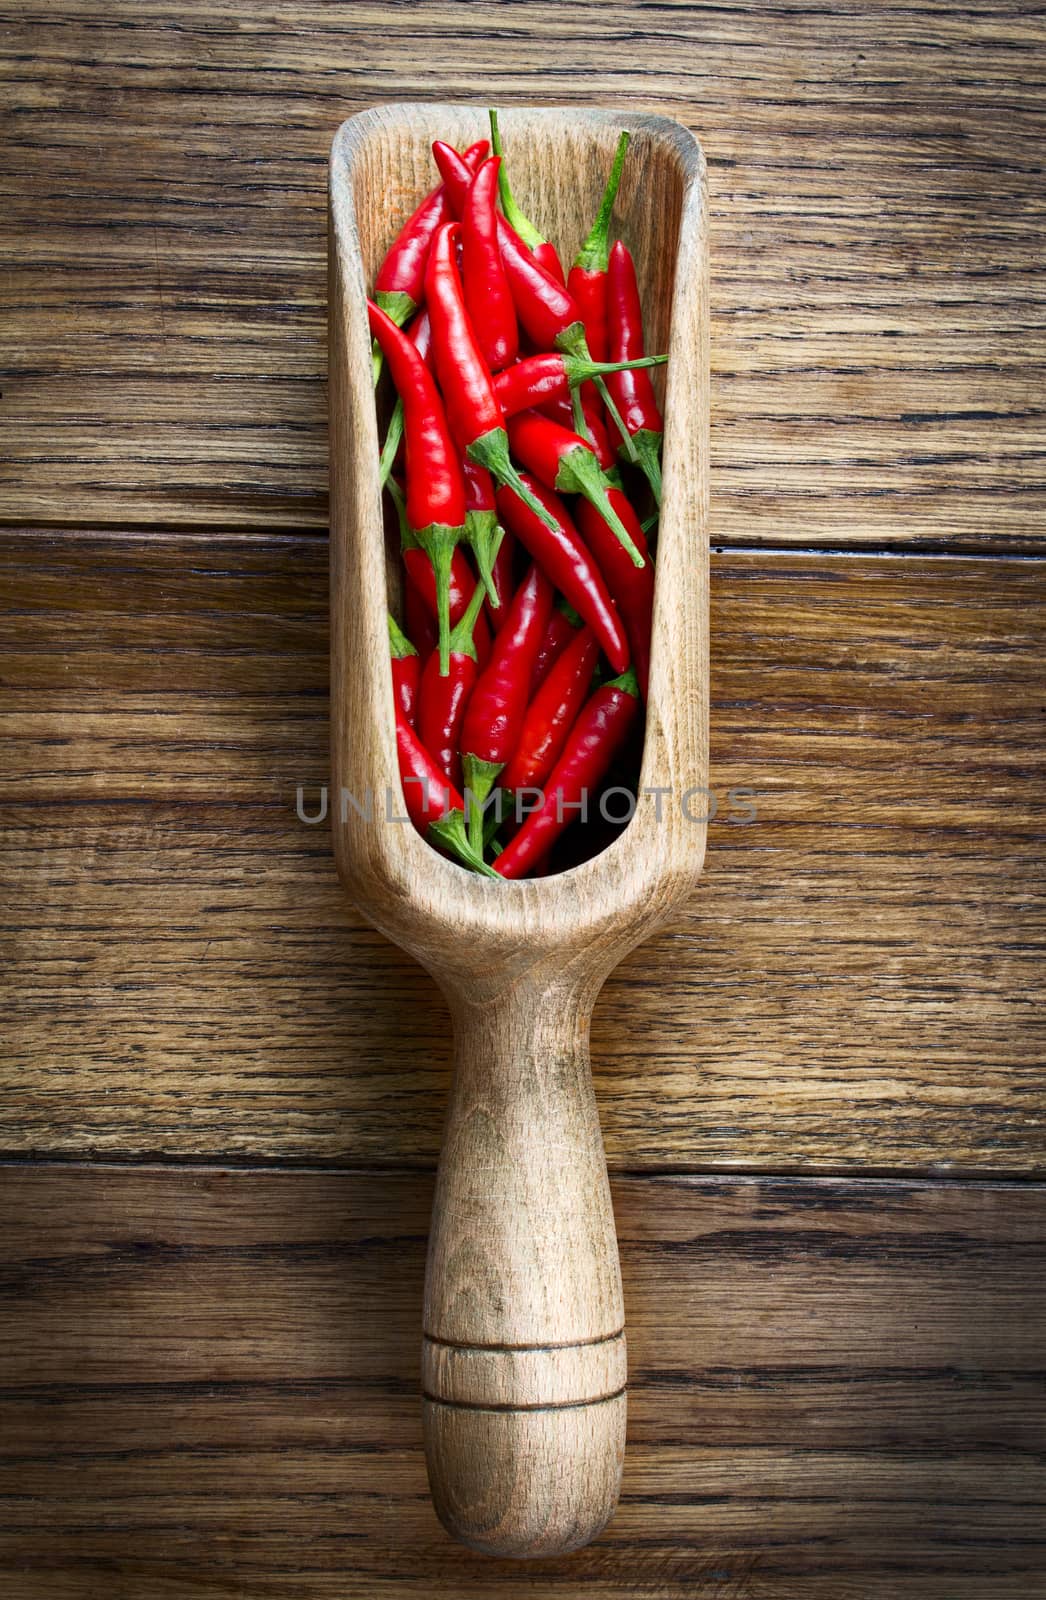 Red chili pepper in wooden scoop